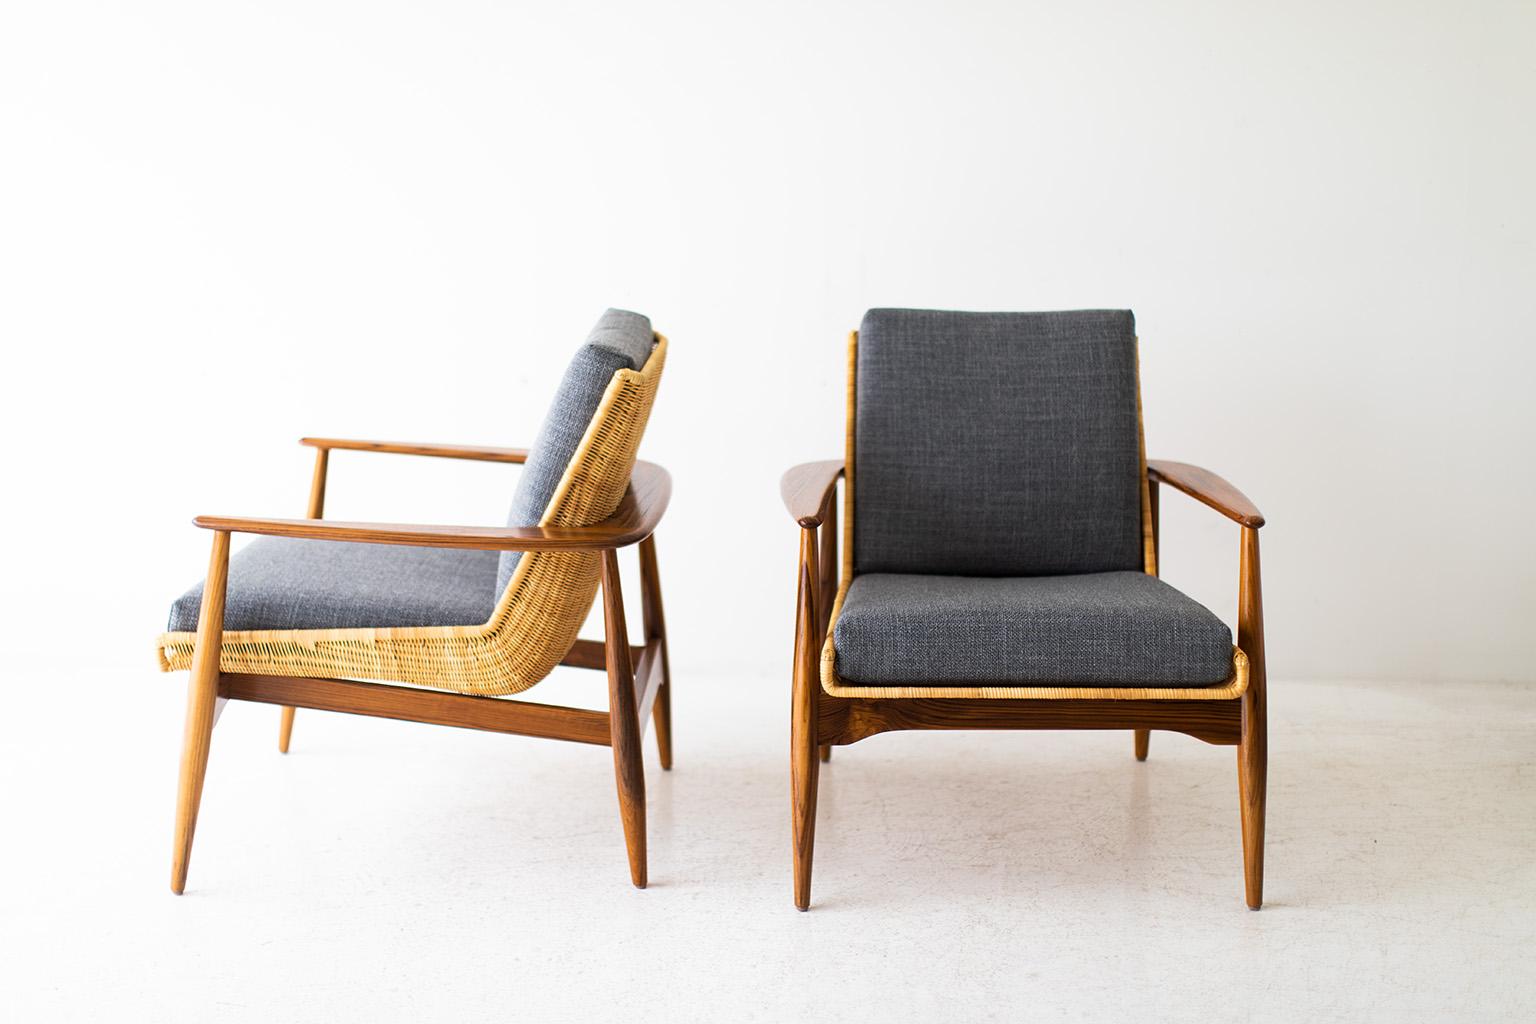 Hand-Crafted Peabody Wicker Chairs, Modern Wicker Chairs, Teak and Thick Weave  For Sale